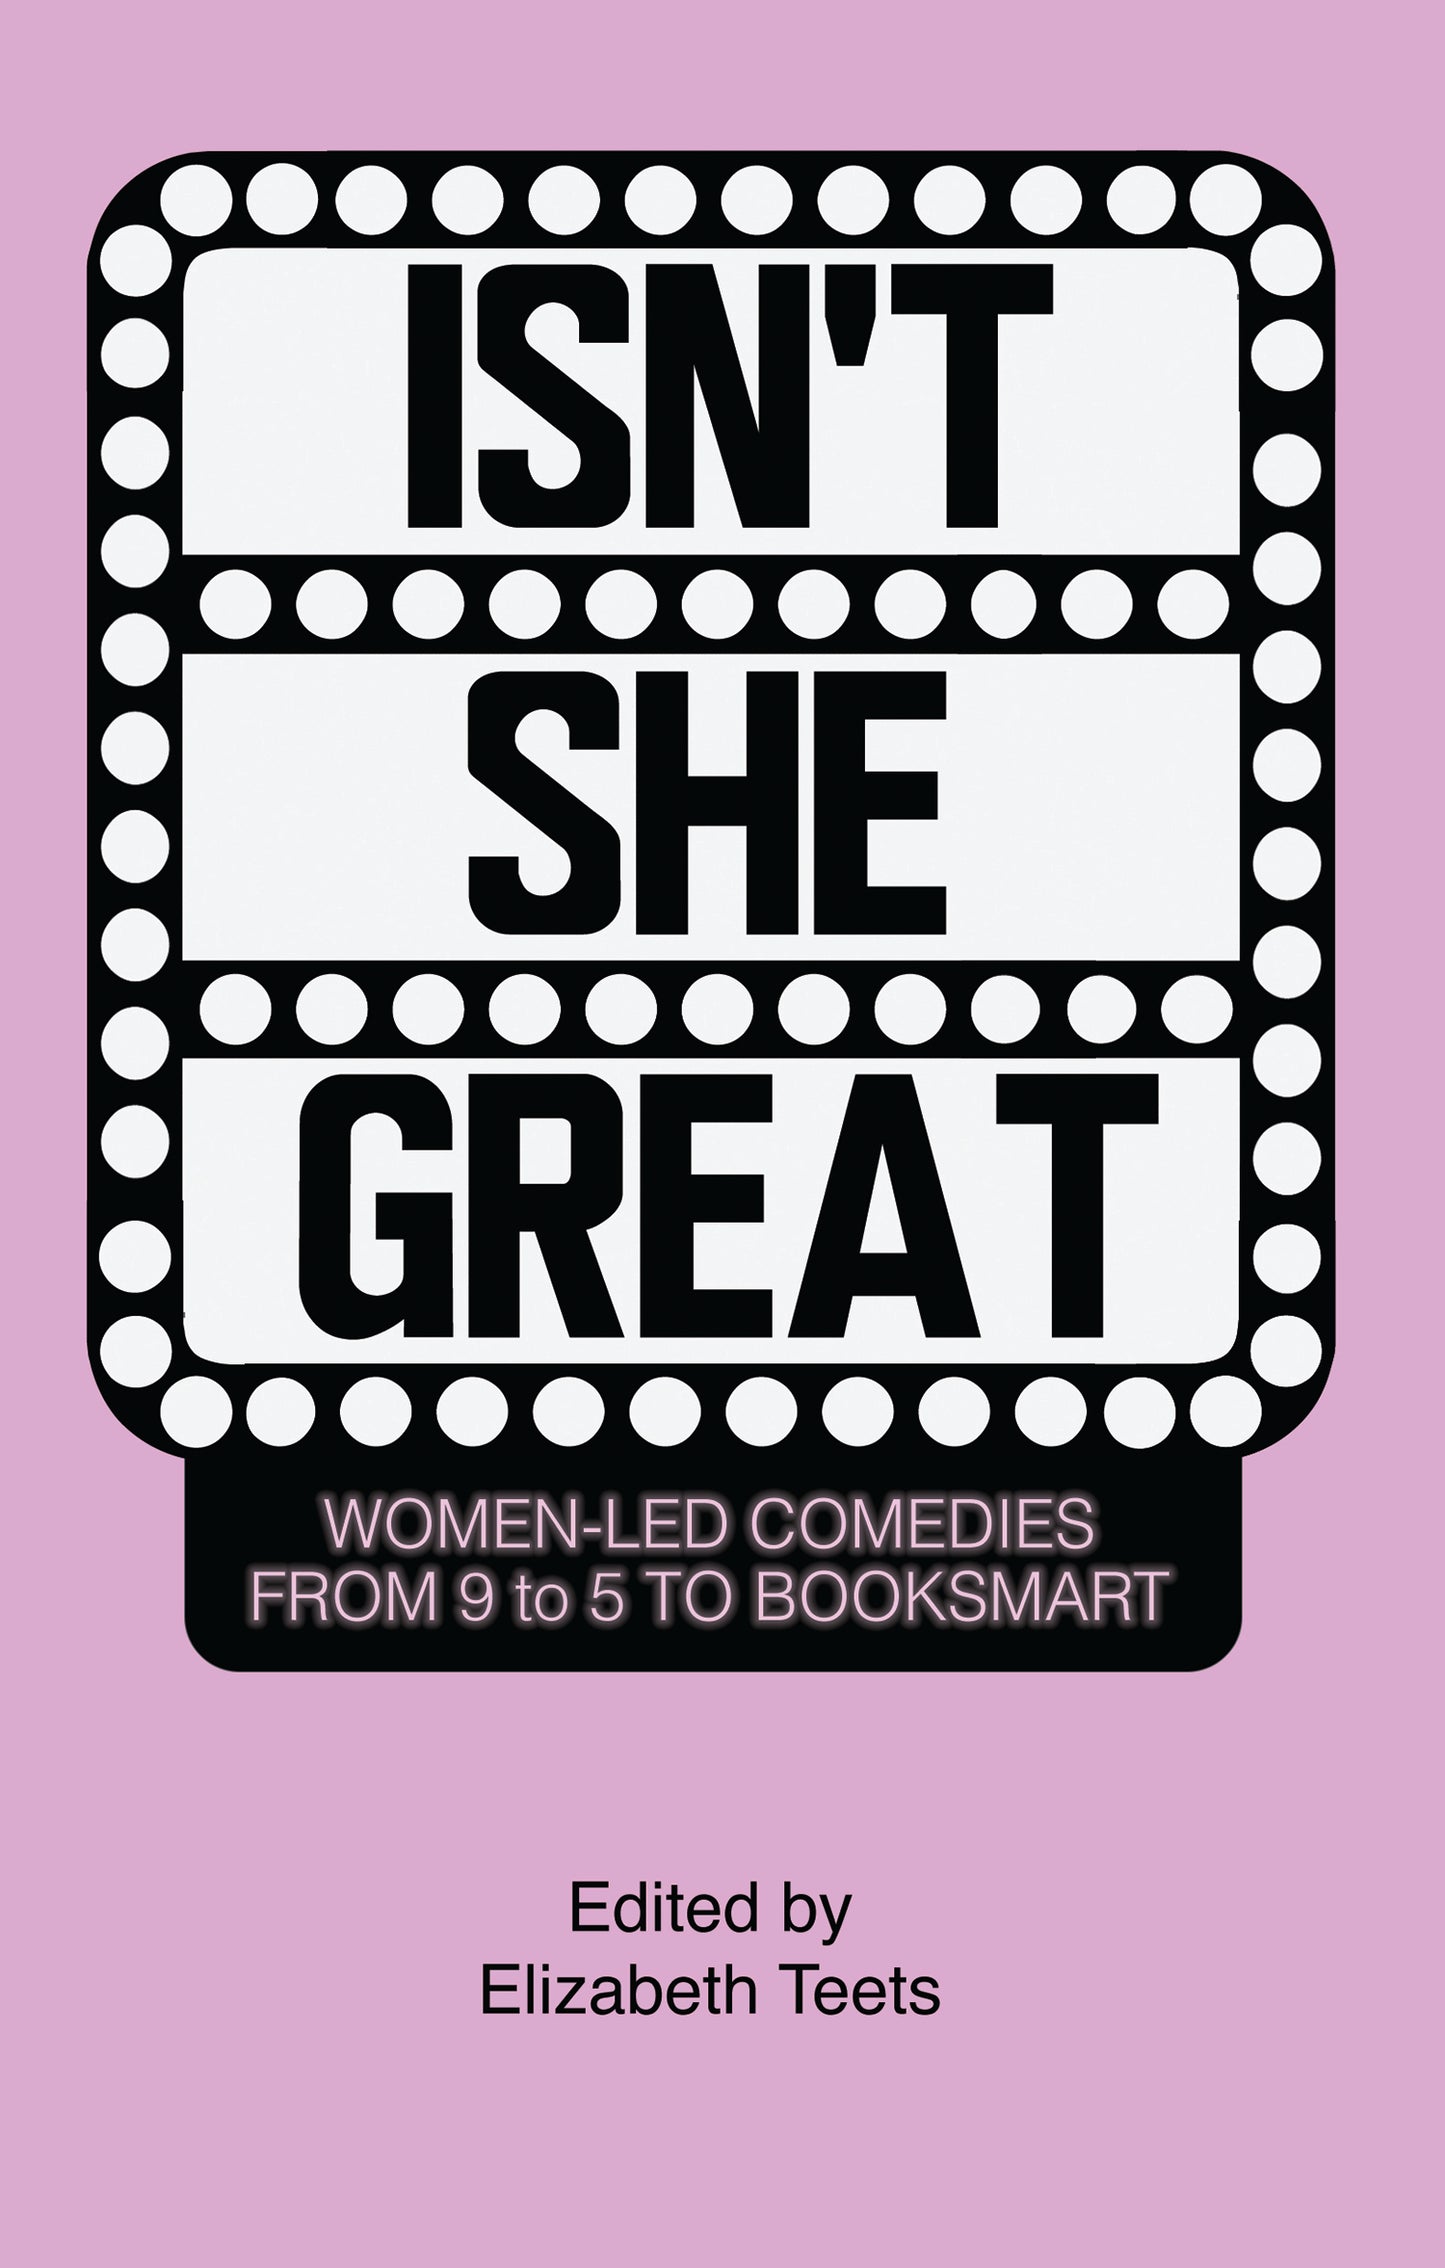 Isn't She Great: Writers on Women-Led Comedies from 9 to 5 to Booksmart